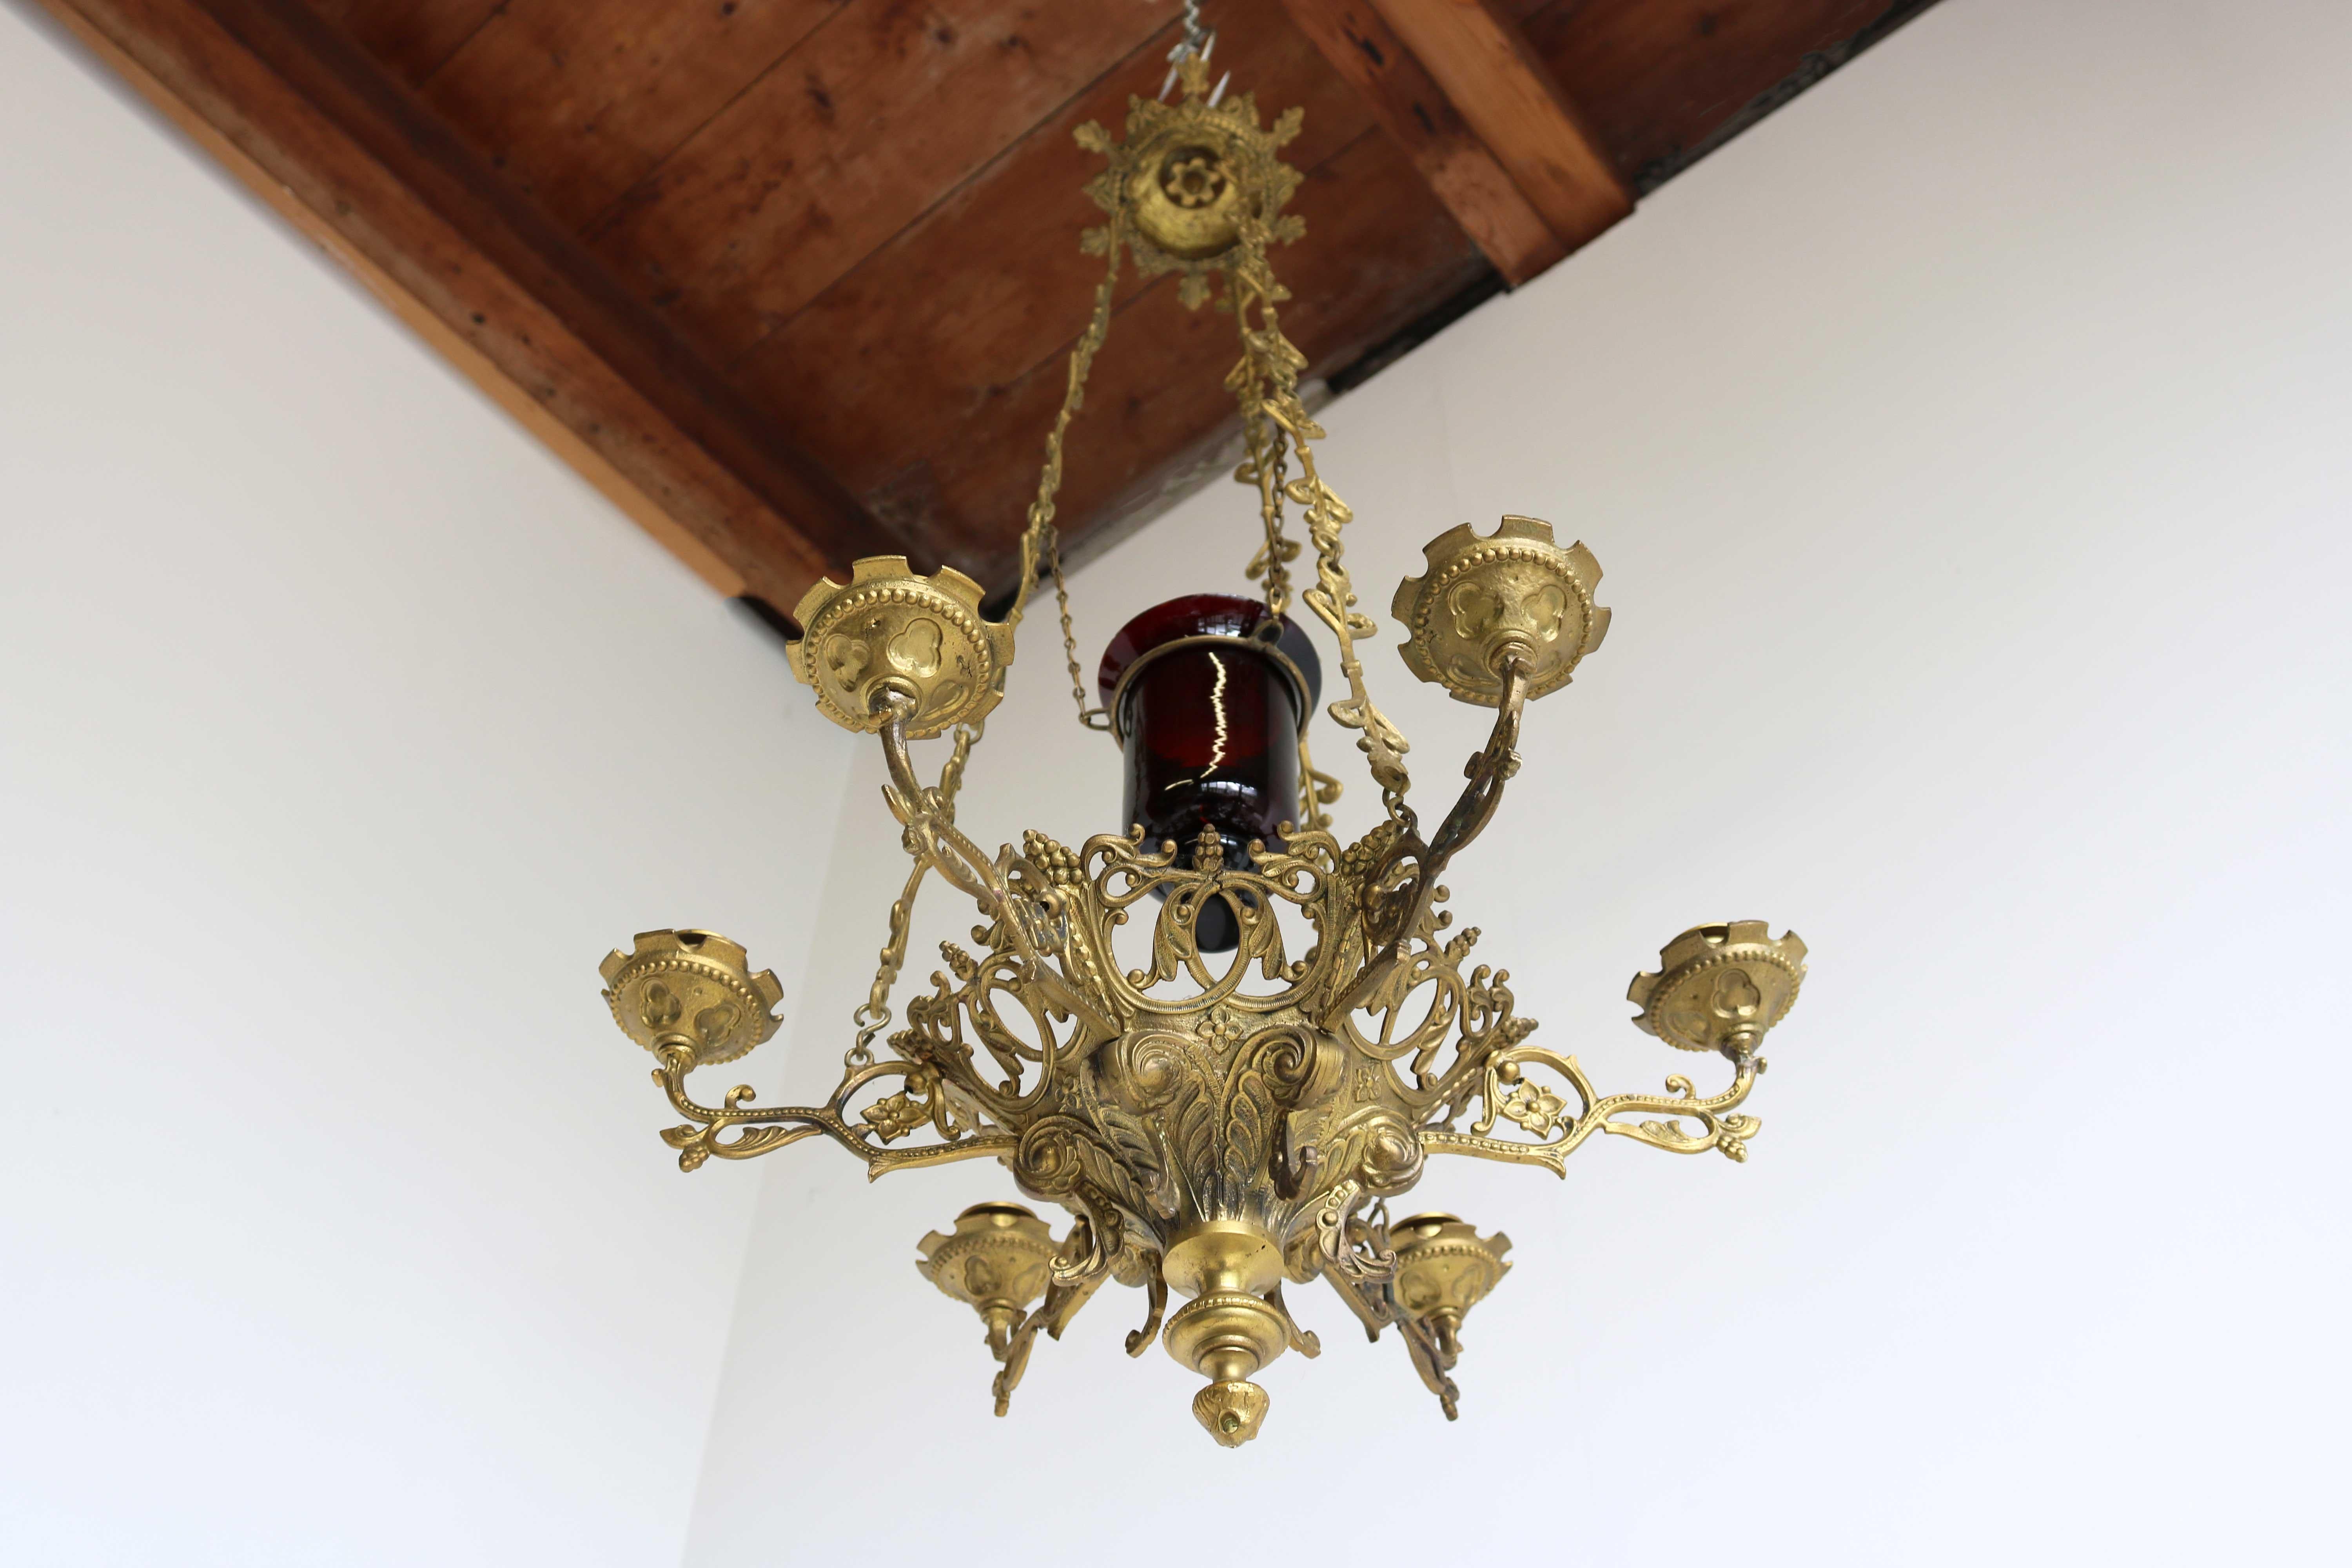 chandeliers for church sanctuary